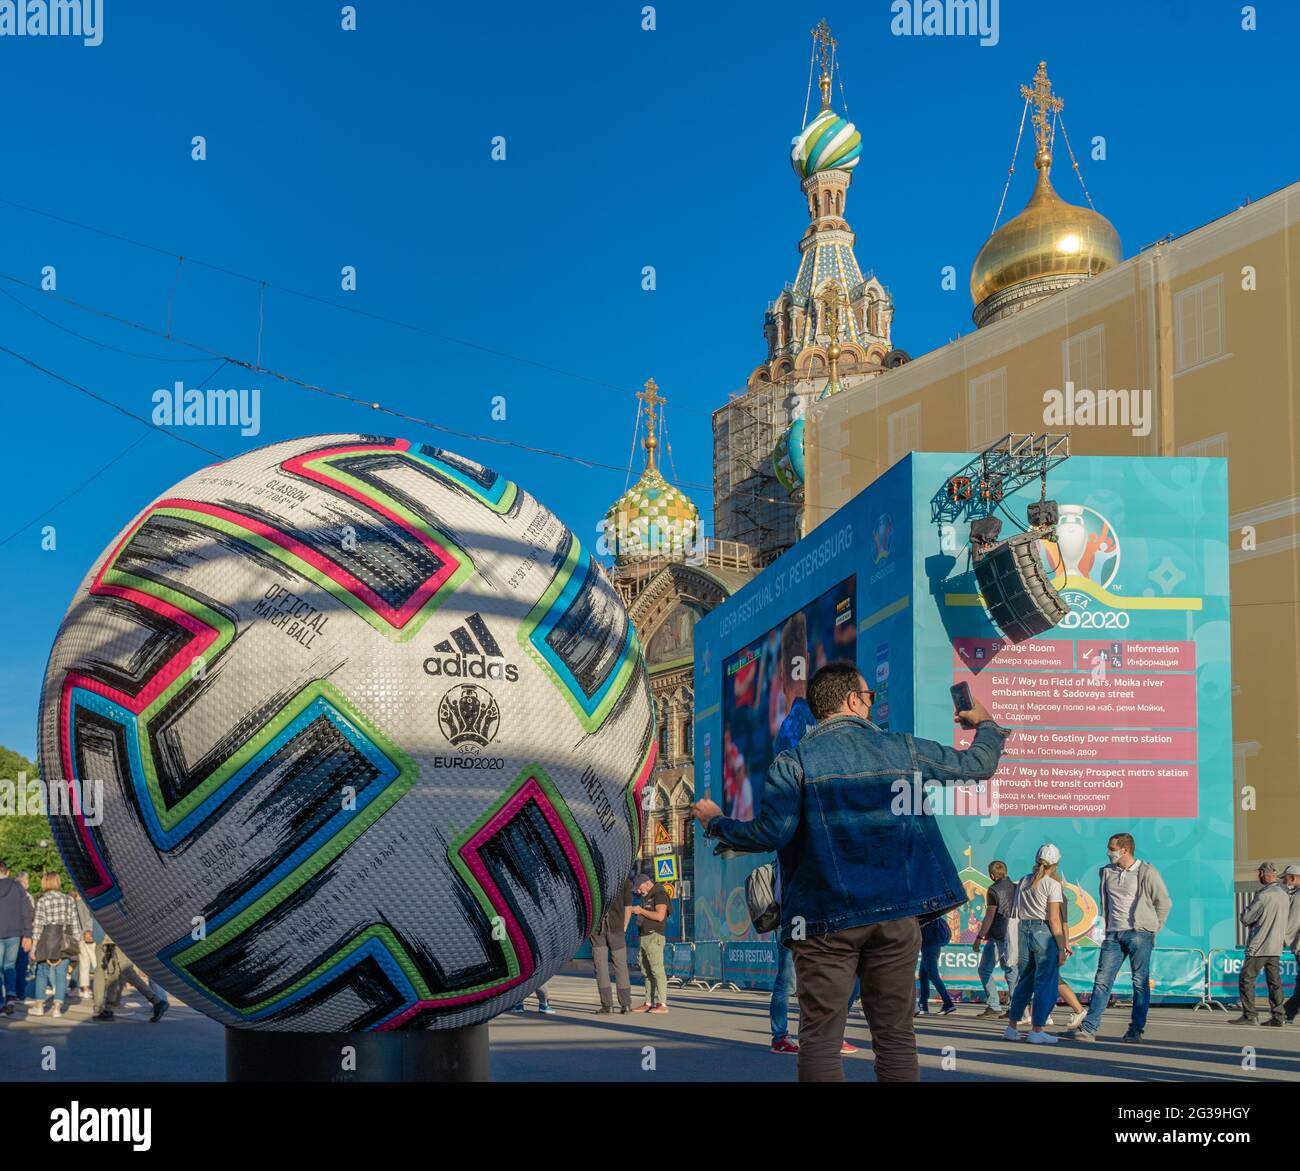 Huge official match ball of euro uefa 2020 championship set in a fan zone in historic center of St Petersburg, Russia Stock Photo